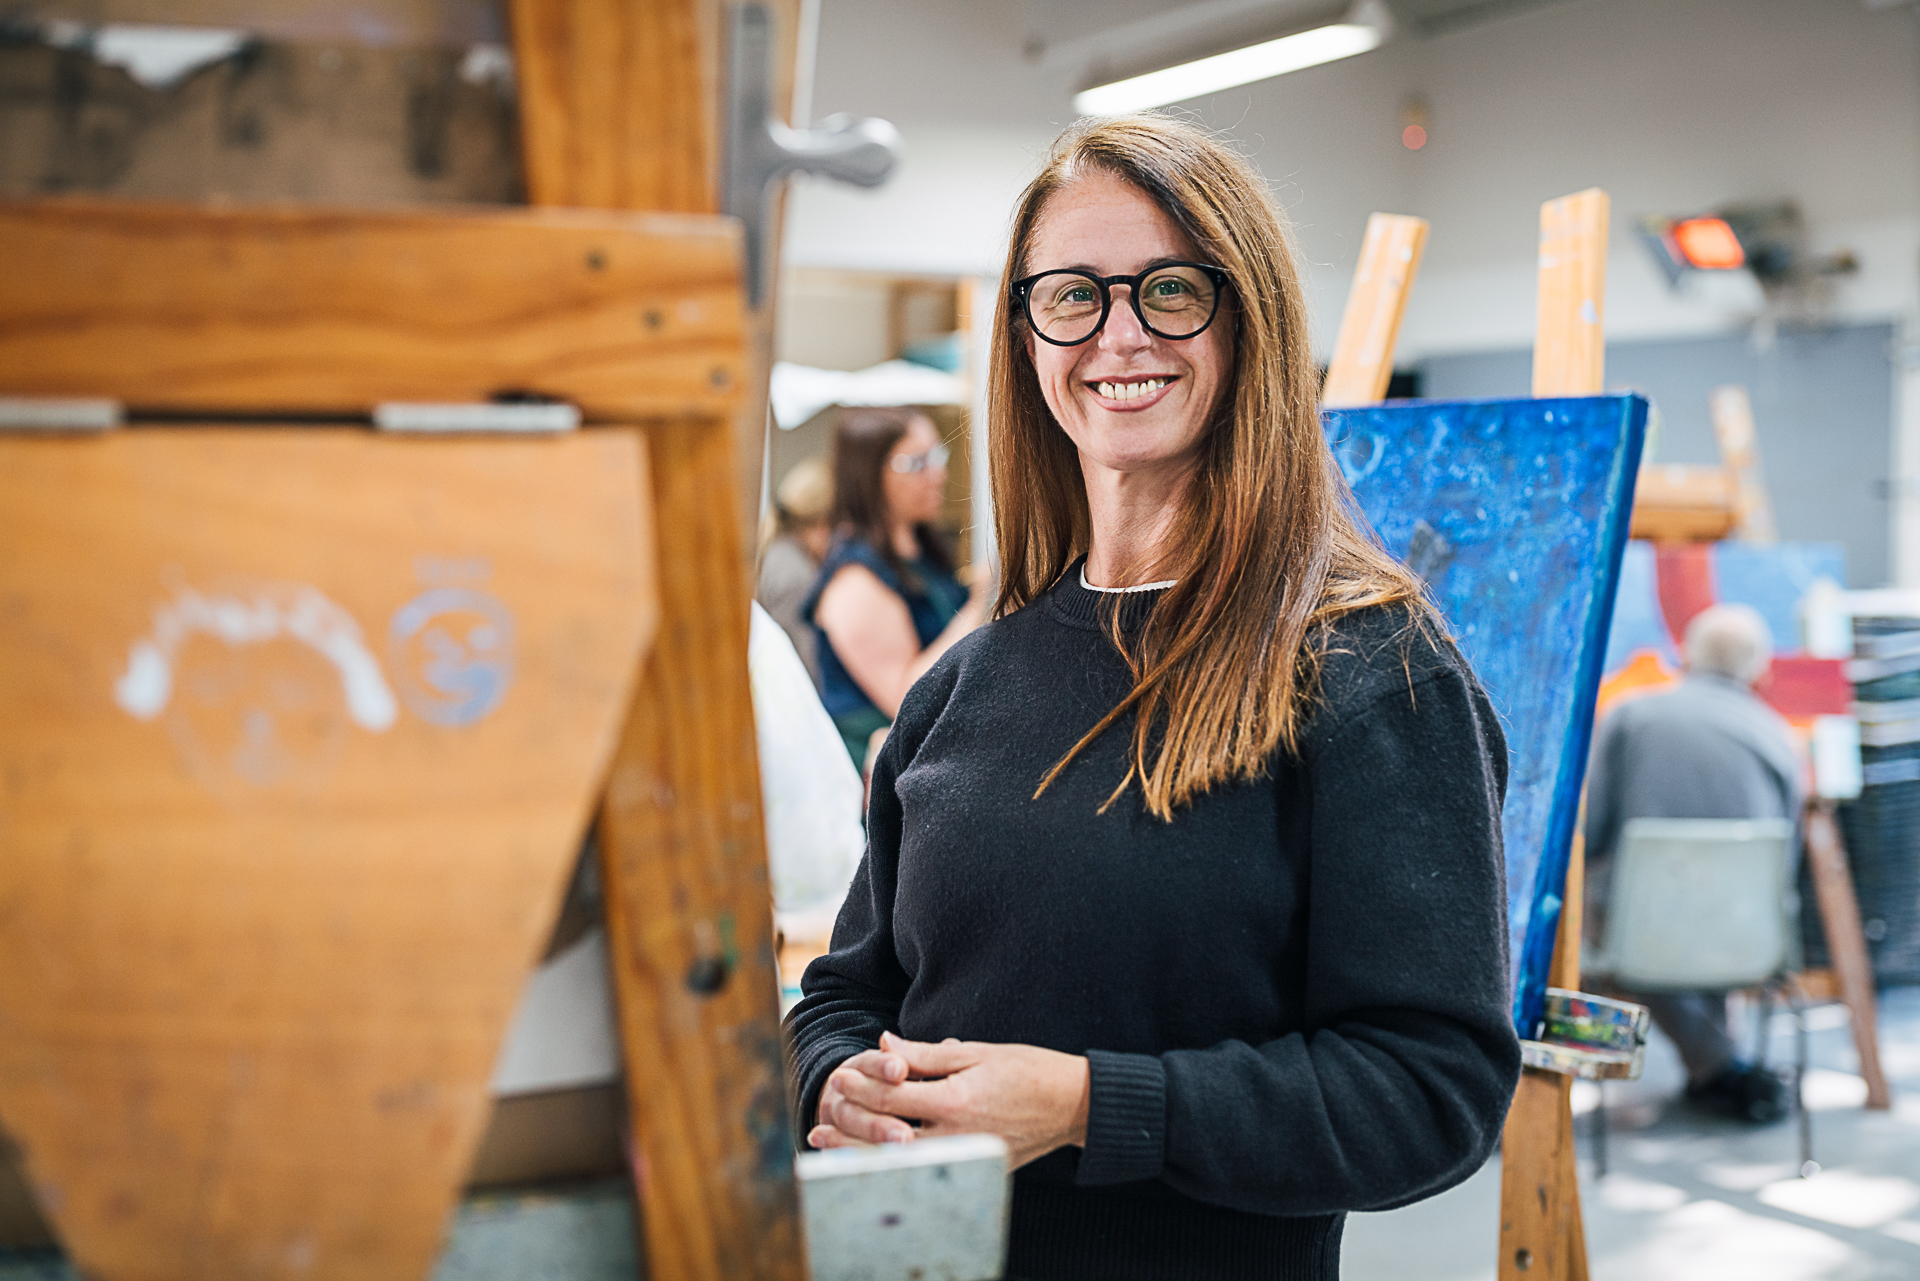 Artist and Hazelhurst teacher Michelle Cawthorn standing in front of painting easel smiling at camera. She has long chestnut coloured brown hair and is wearing a navy jumper and heavy rimmed glasses.